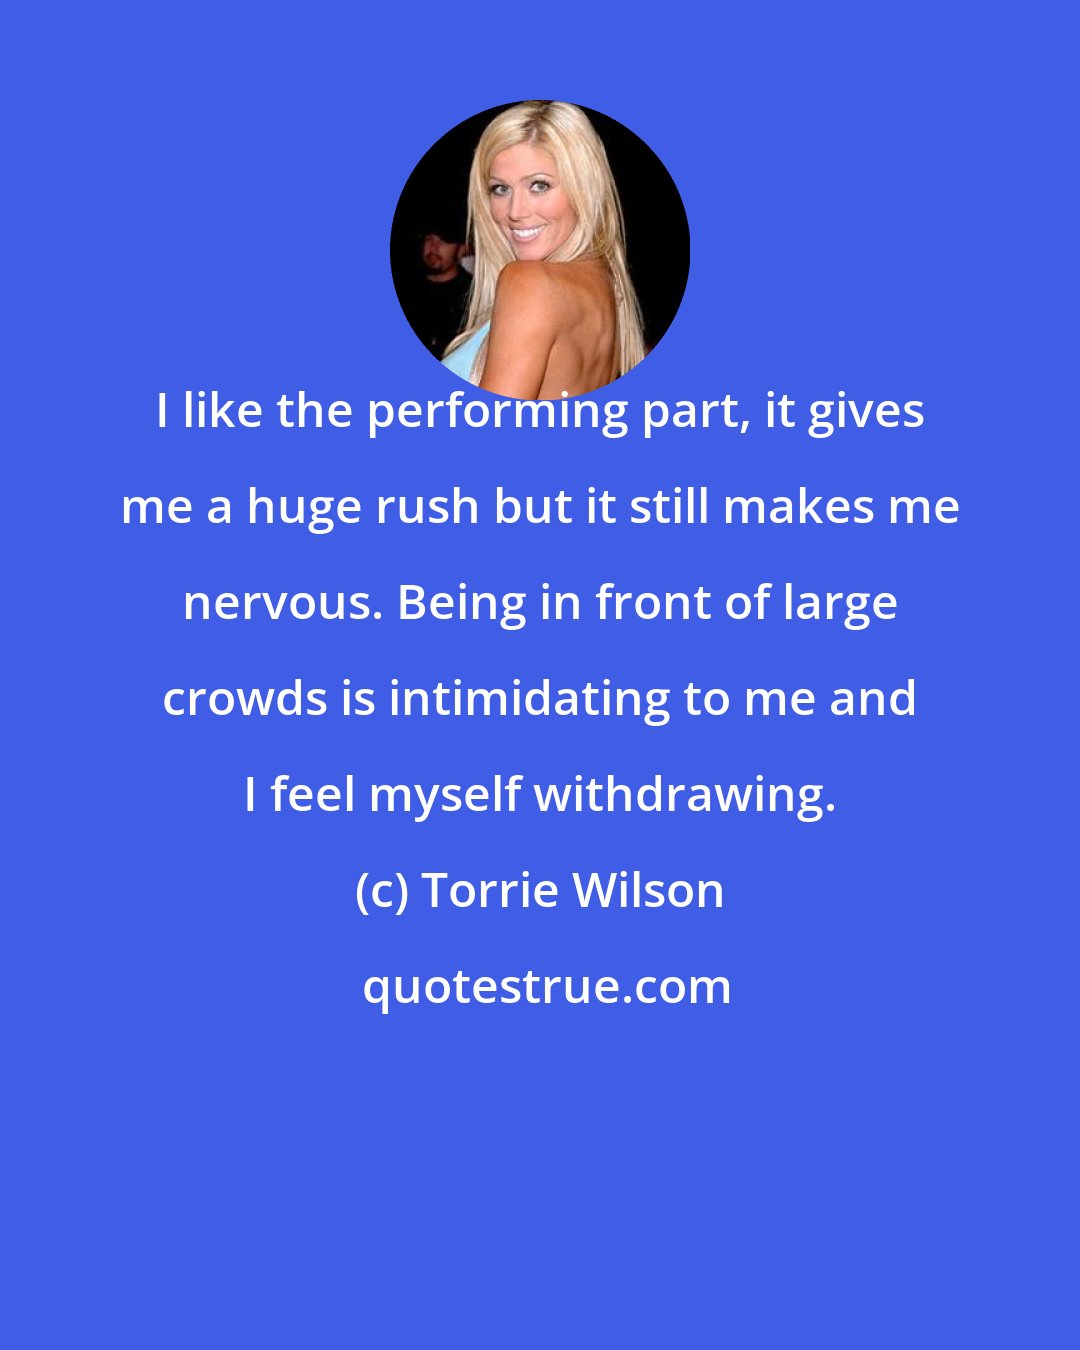 Torrie Wilson: I like the performing part, it gives me a huge rush but it still makes me nervous. Being in front of large crowds is intimidating to me and I feel myself withdrawing.